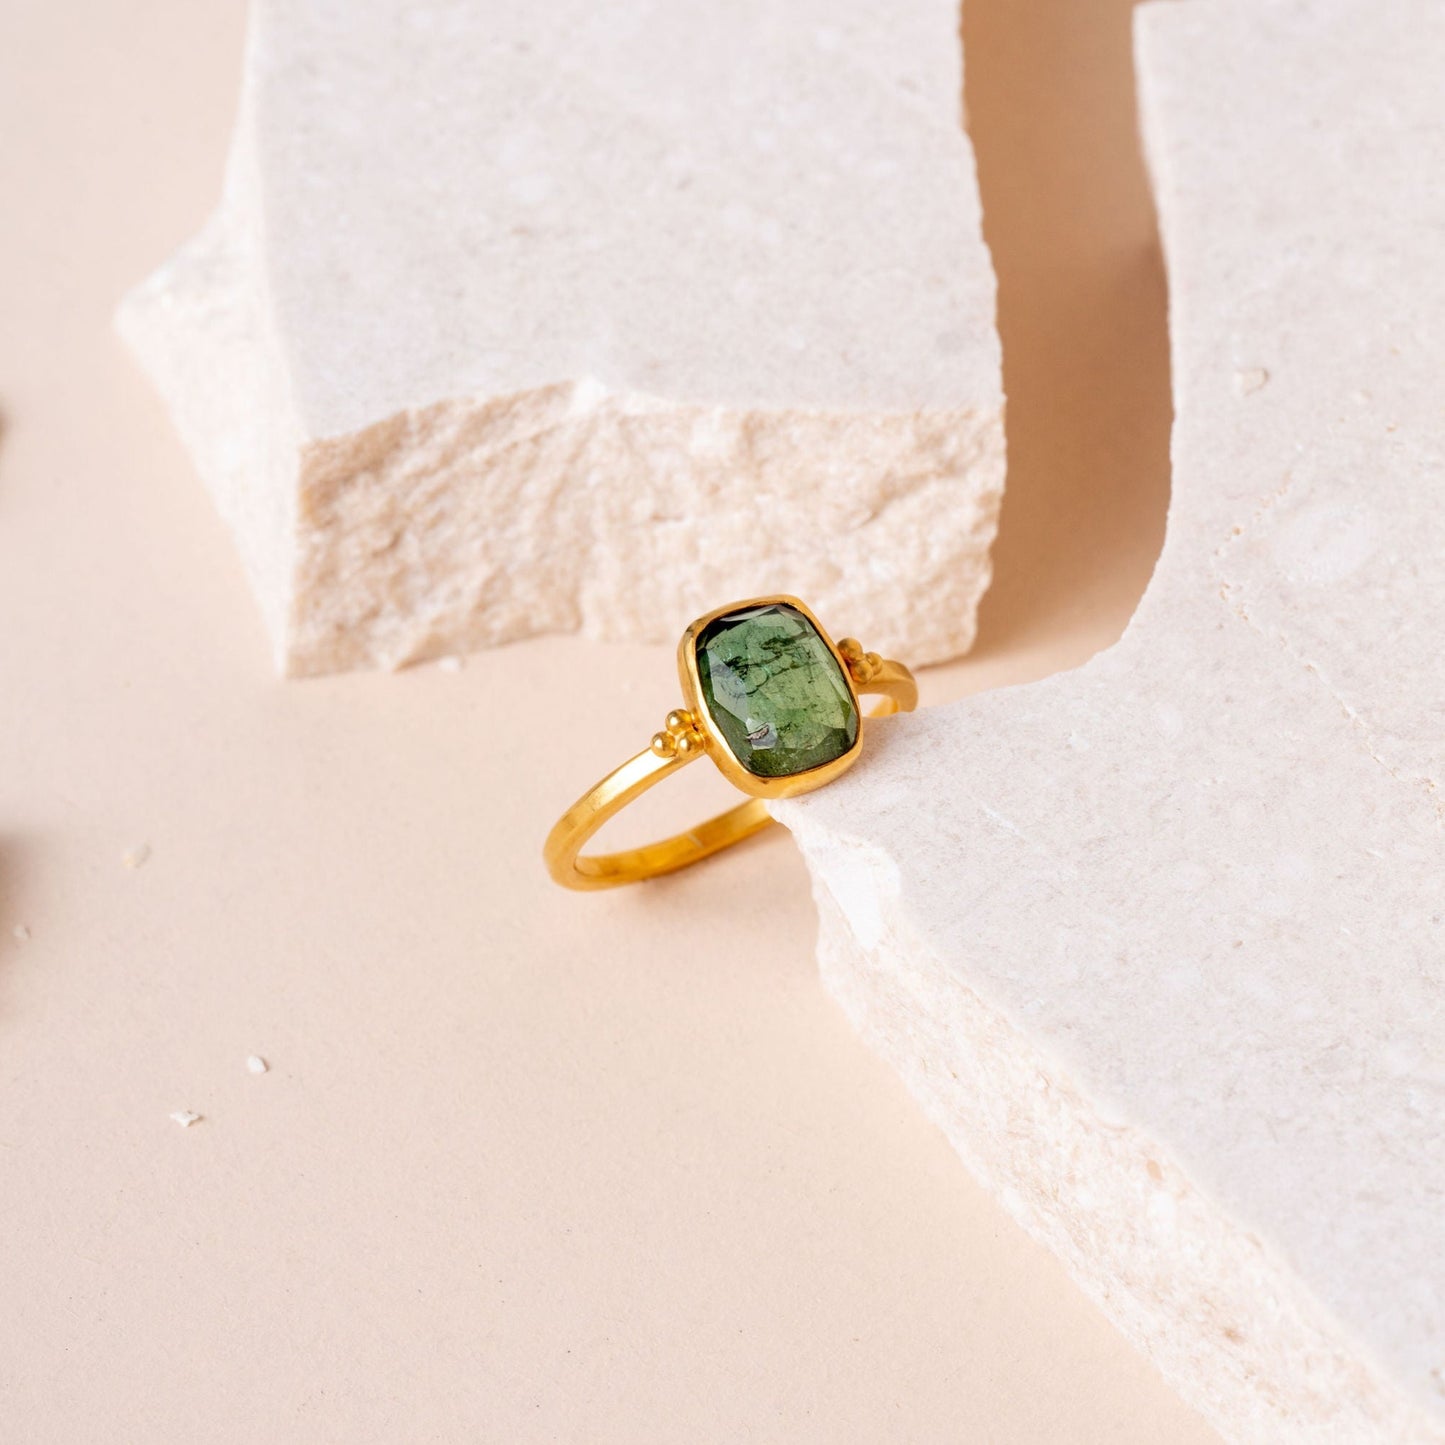 A stand-alone image showcasing the beauty of a handcrafted gold ring adorned with delicate granulation and a striking green tourmaline gemstone.